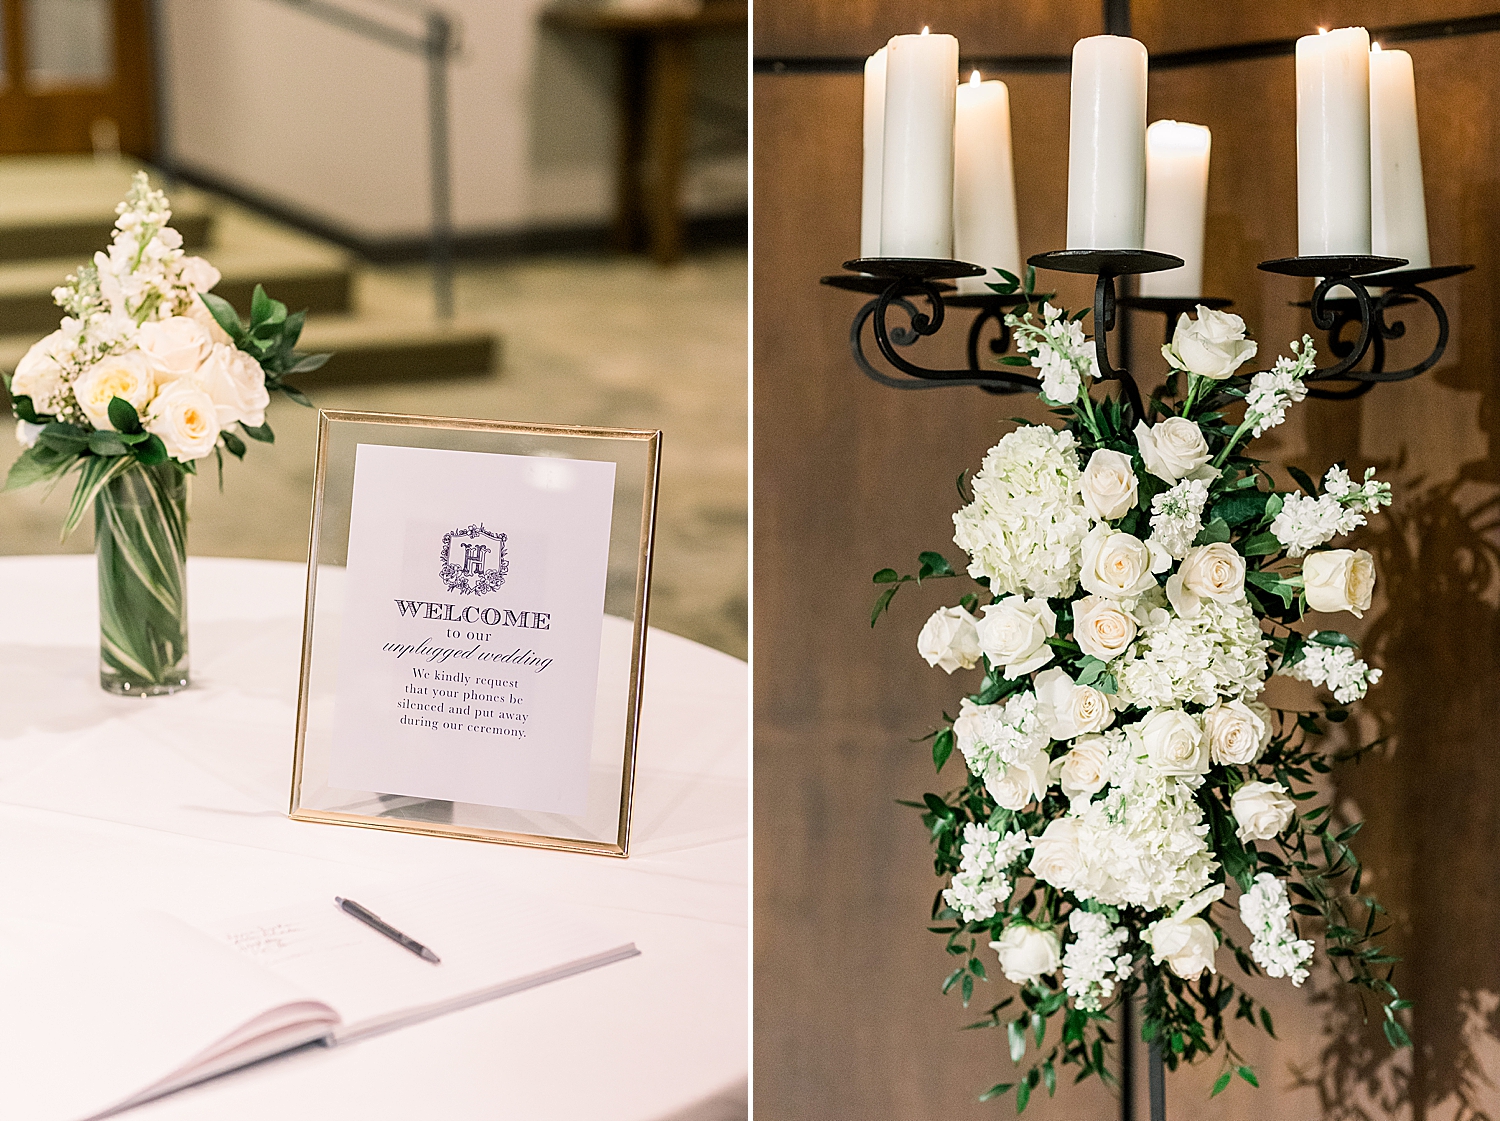 details for Mountain Brook Community Church wedding